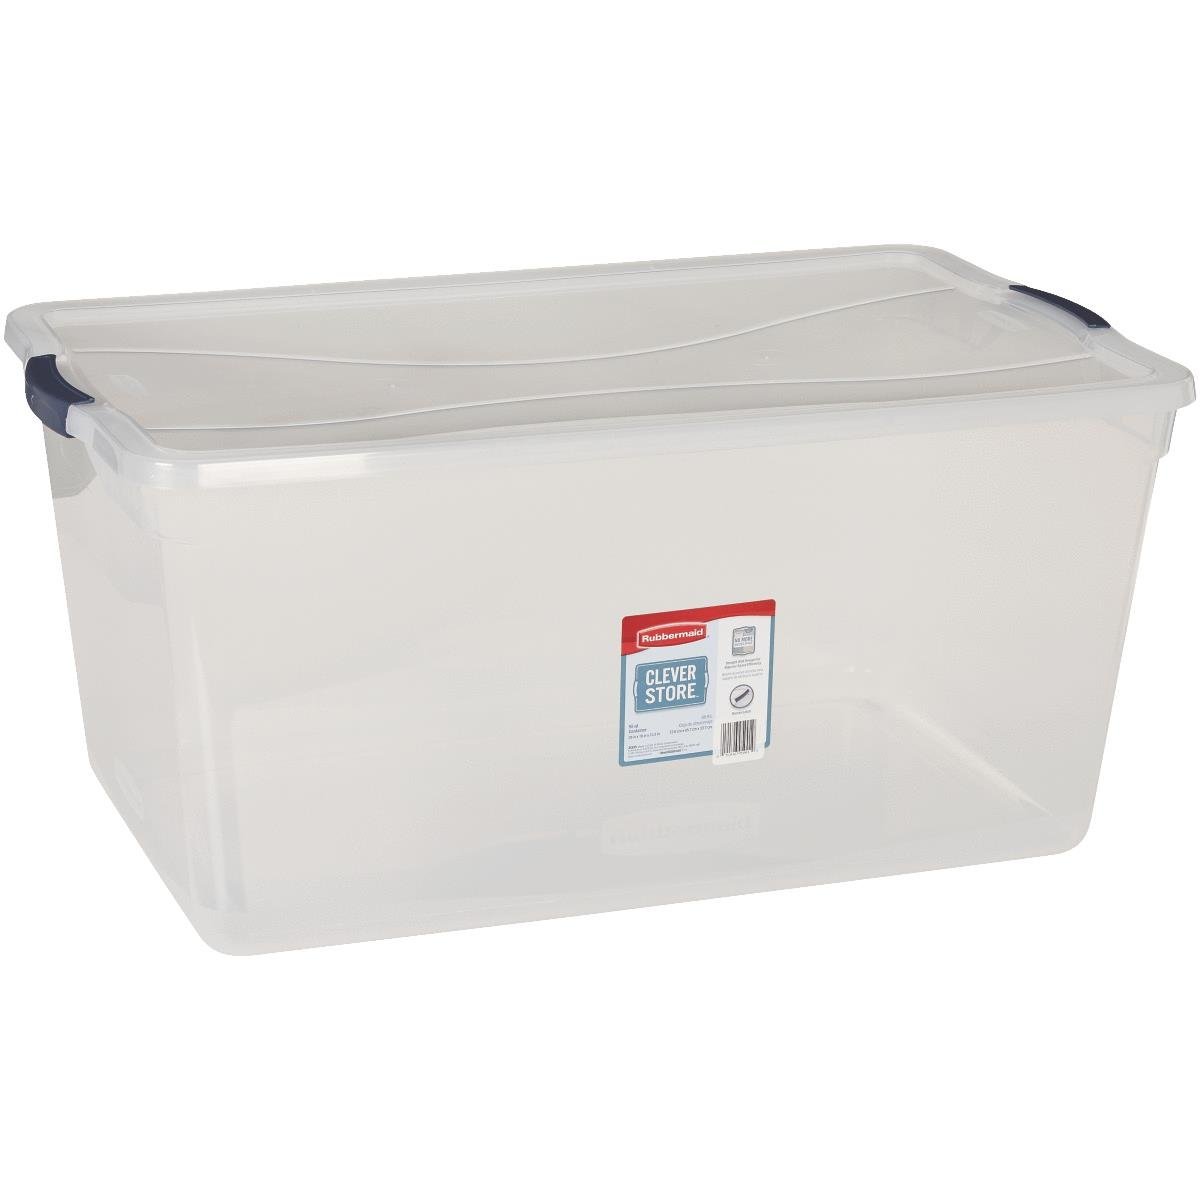 Rmcc950001 Clever Store Latching Lid Storage Tote, Clear